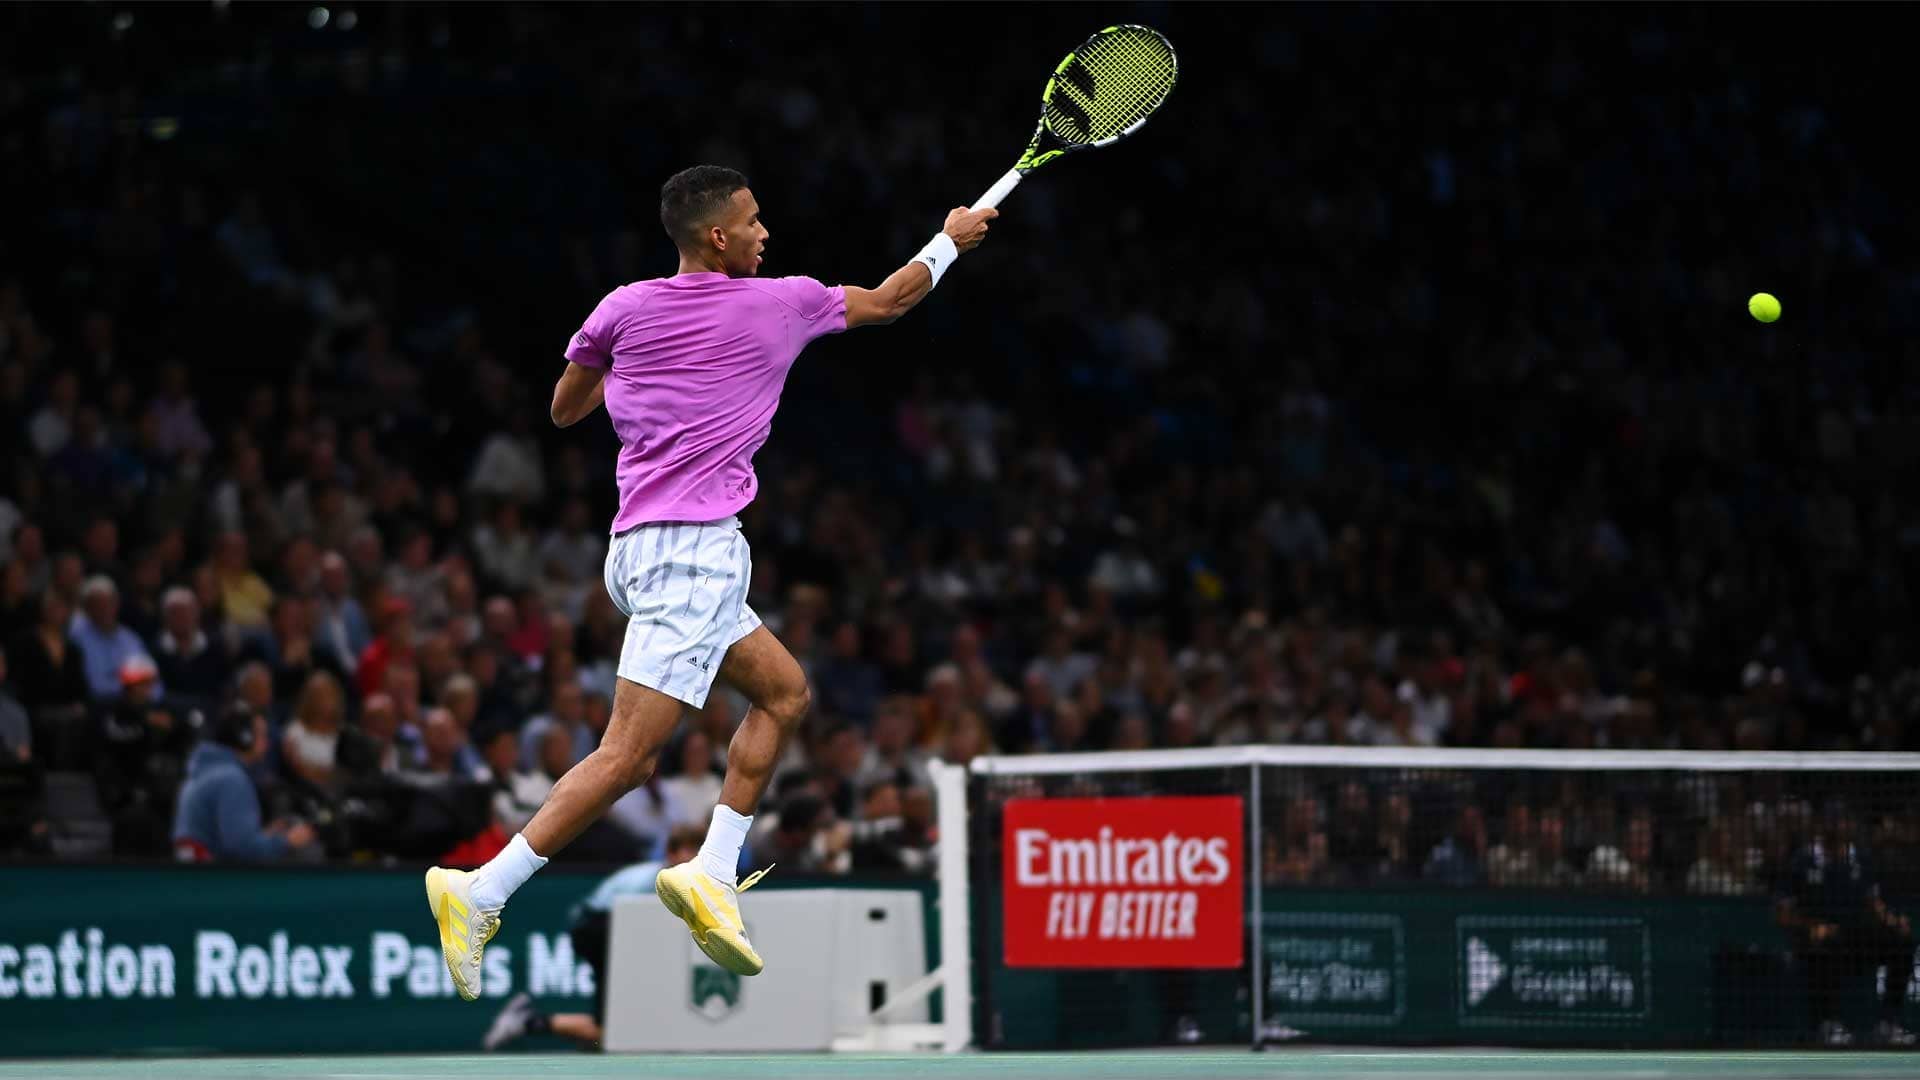 Felix Auger-Aliassime fires a forehand on Saturday at the Rolex Paris Masters.